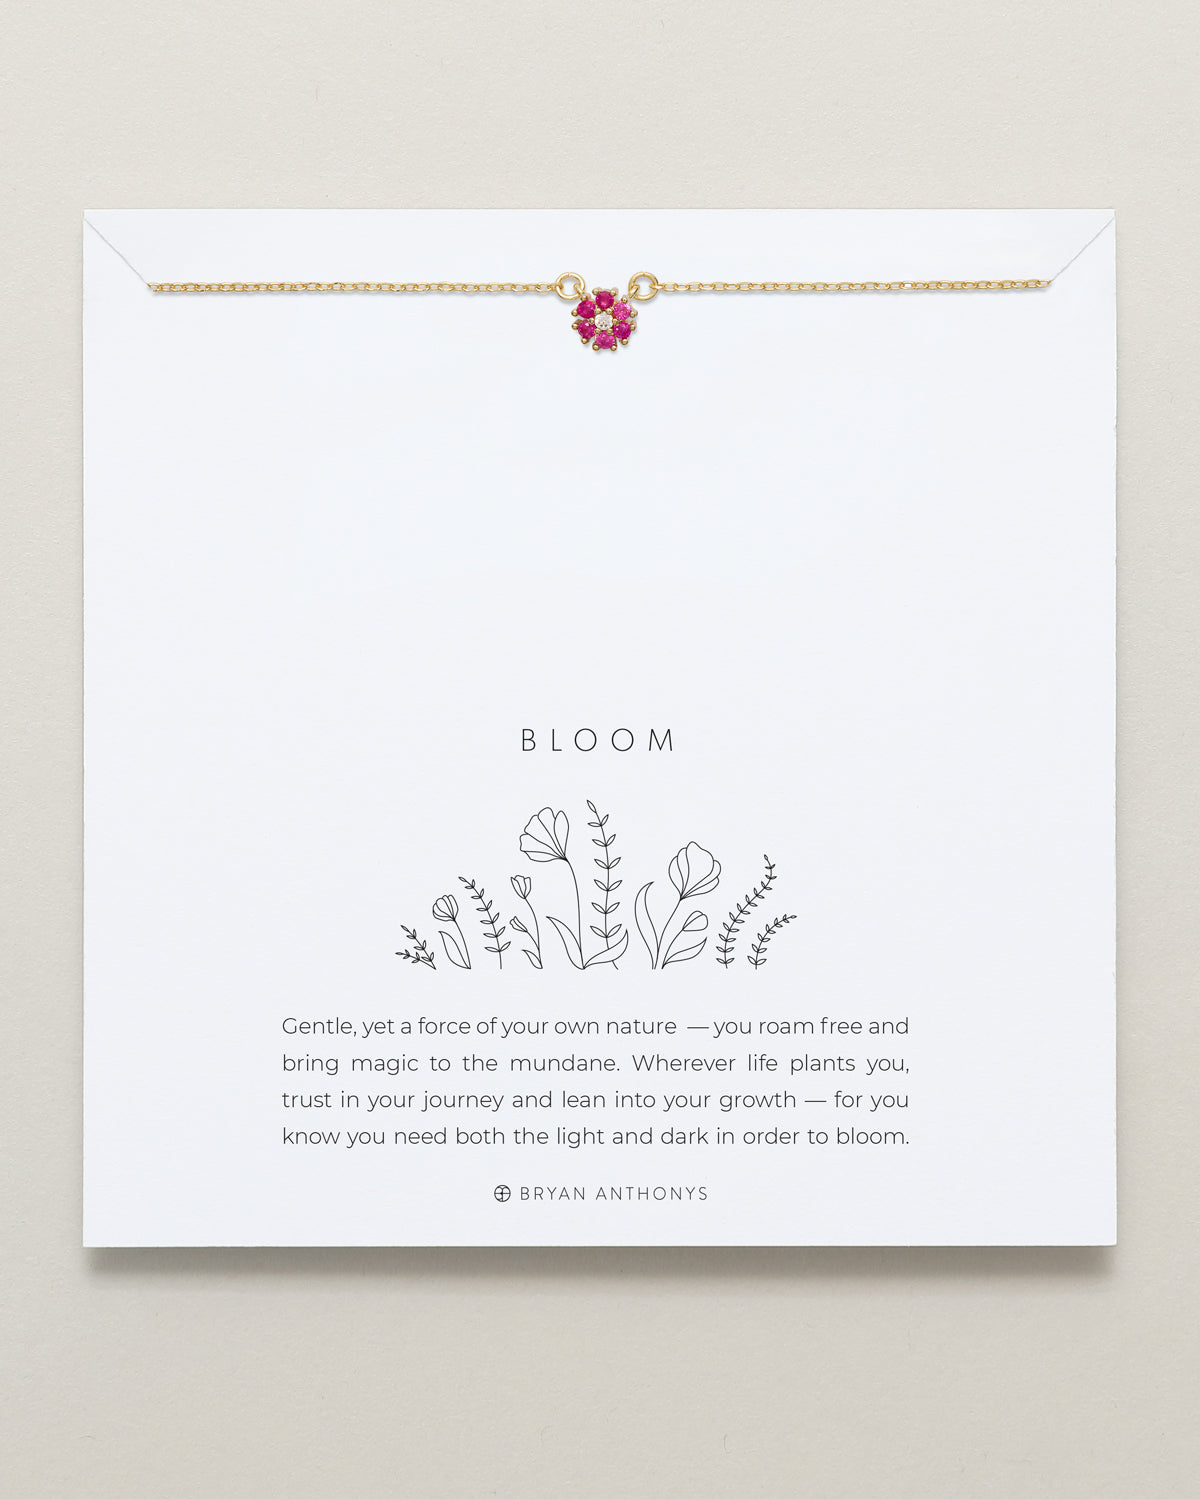 Bryan Anthonys Bloom Gold Pink Dainty Necklace On Card